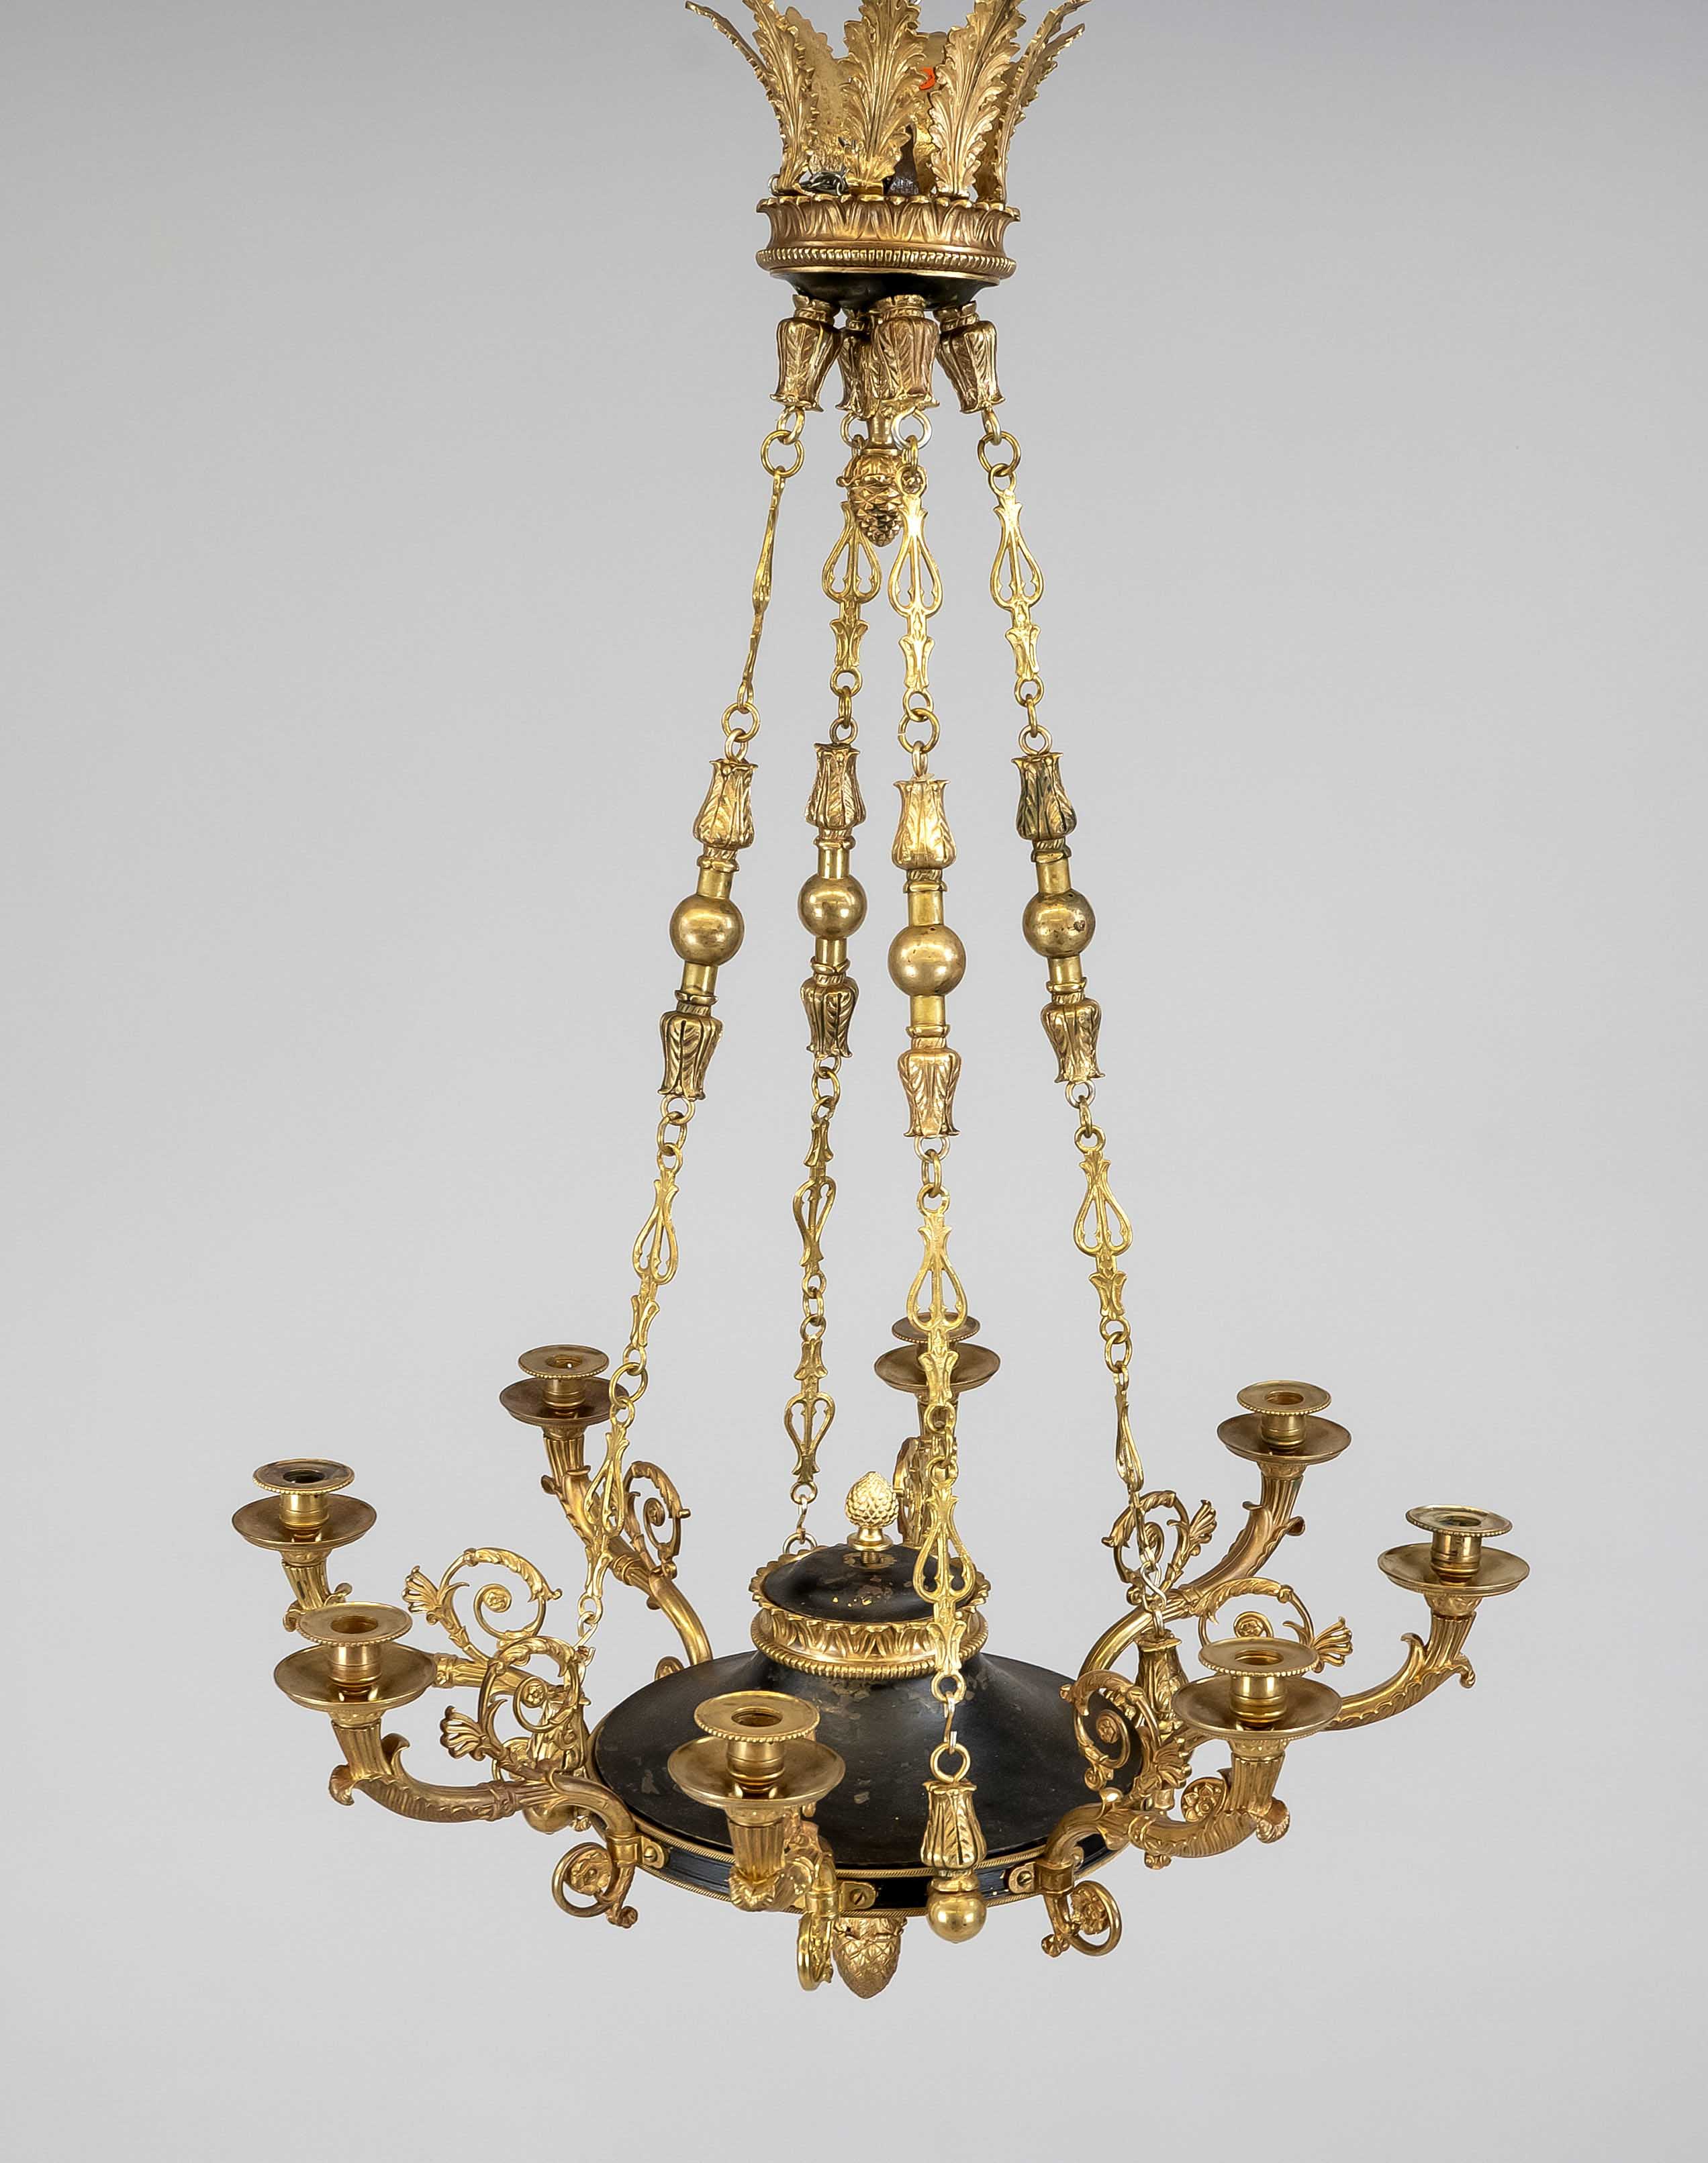 Empire style ceiling chandelier, late 19th century, bronze gilded and iron. Profiled and